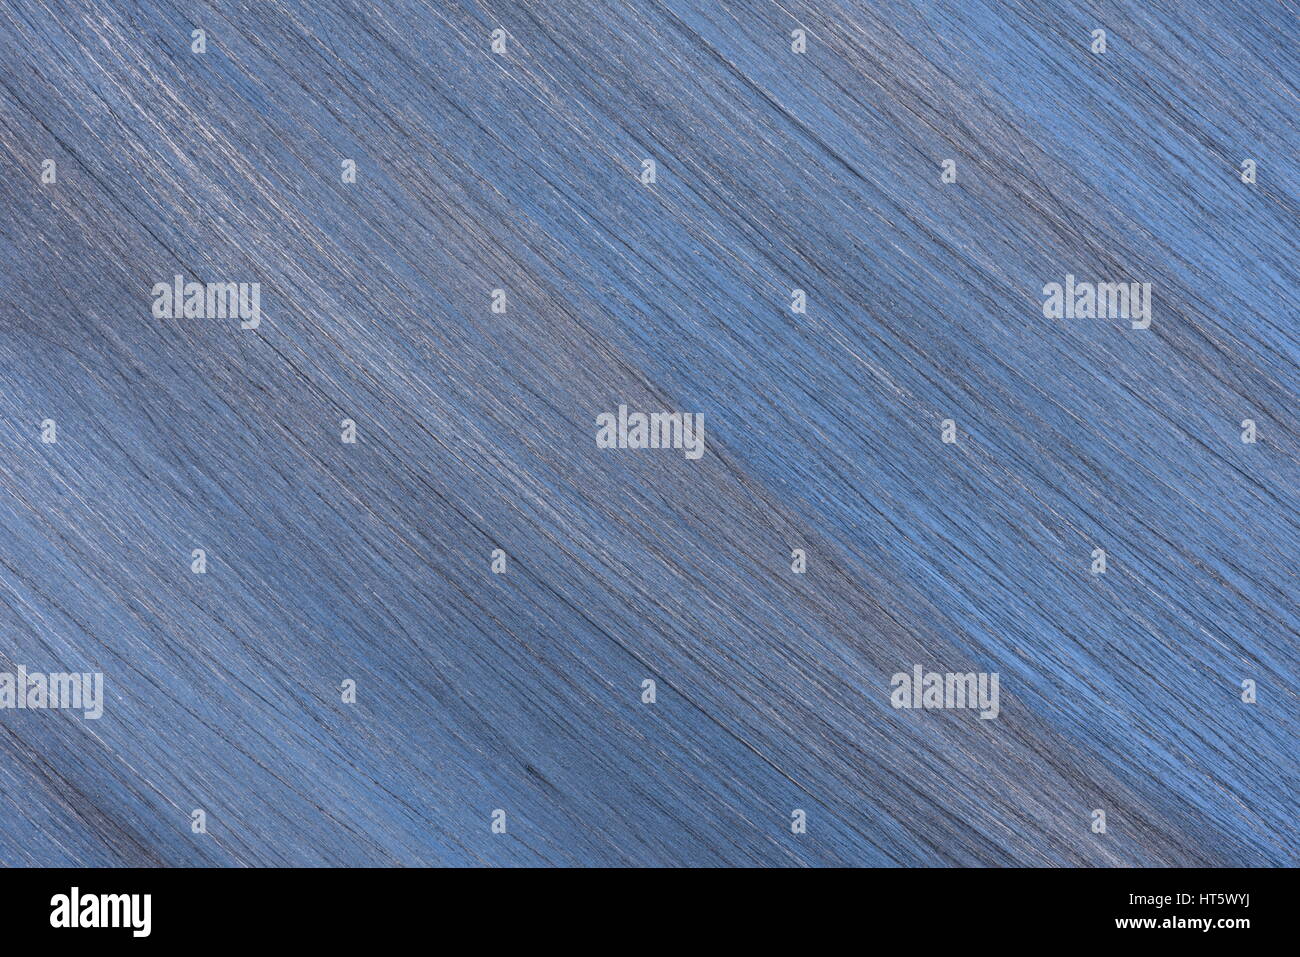 Scratched Aluminum Plate Texture or Background Stock Photo